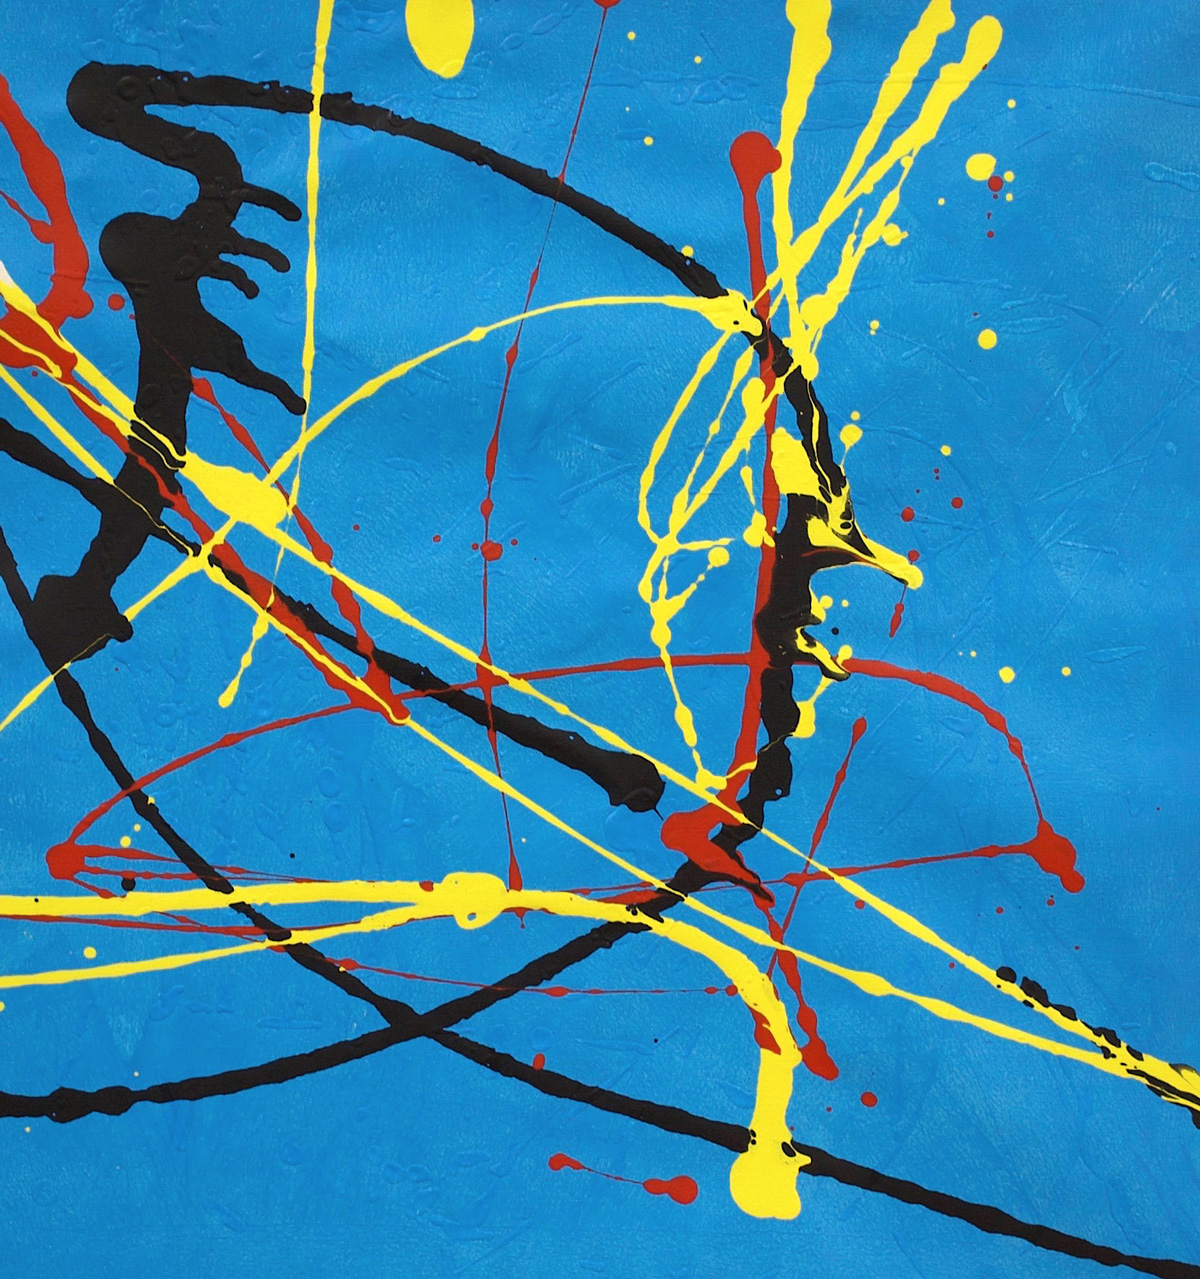 Painting: Red, black and yellow splatter on a blue background.